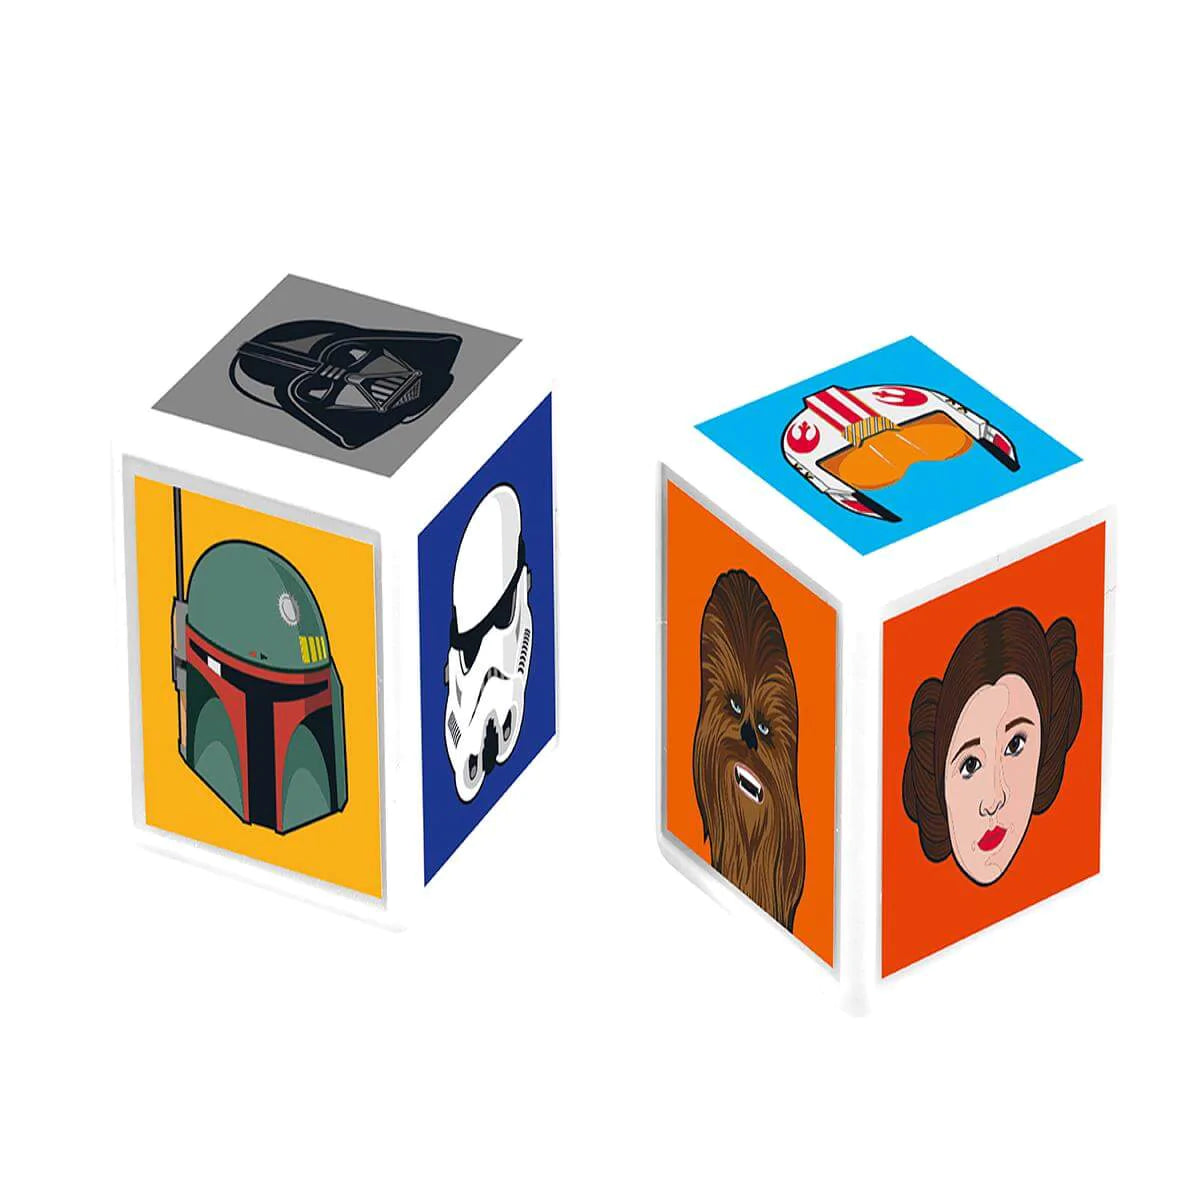 Star Wars Crazy Cube Game